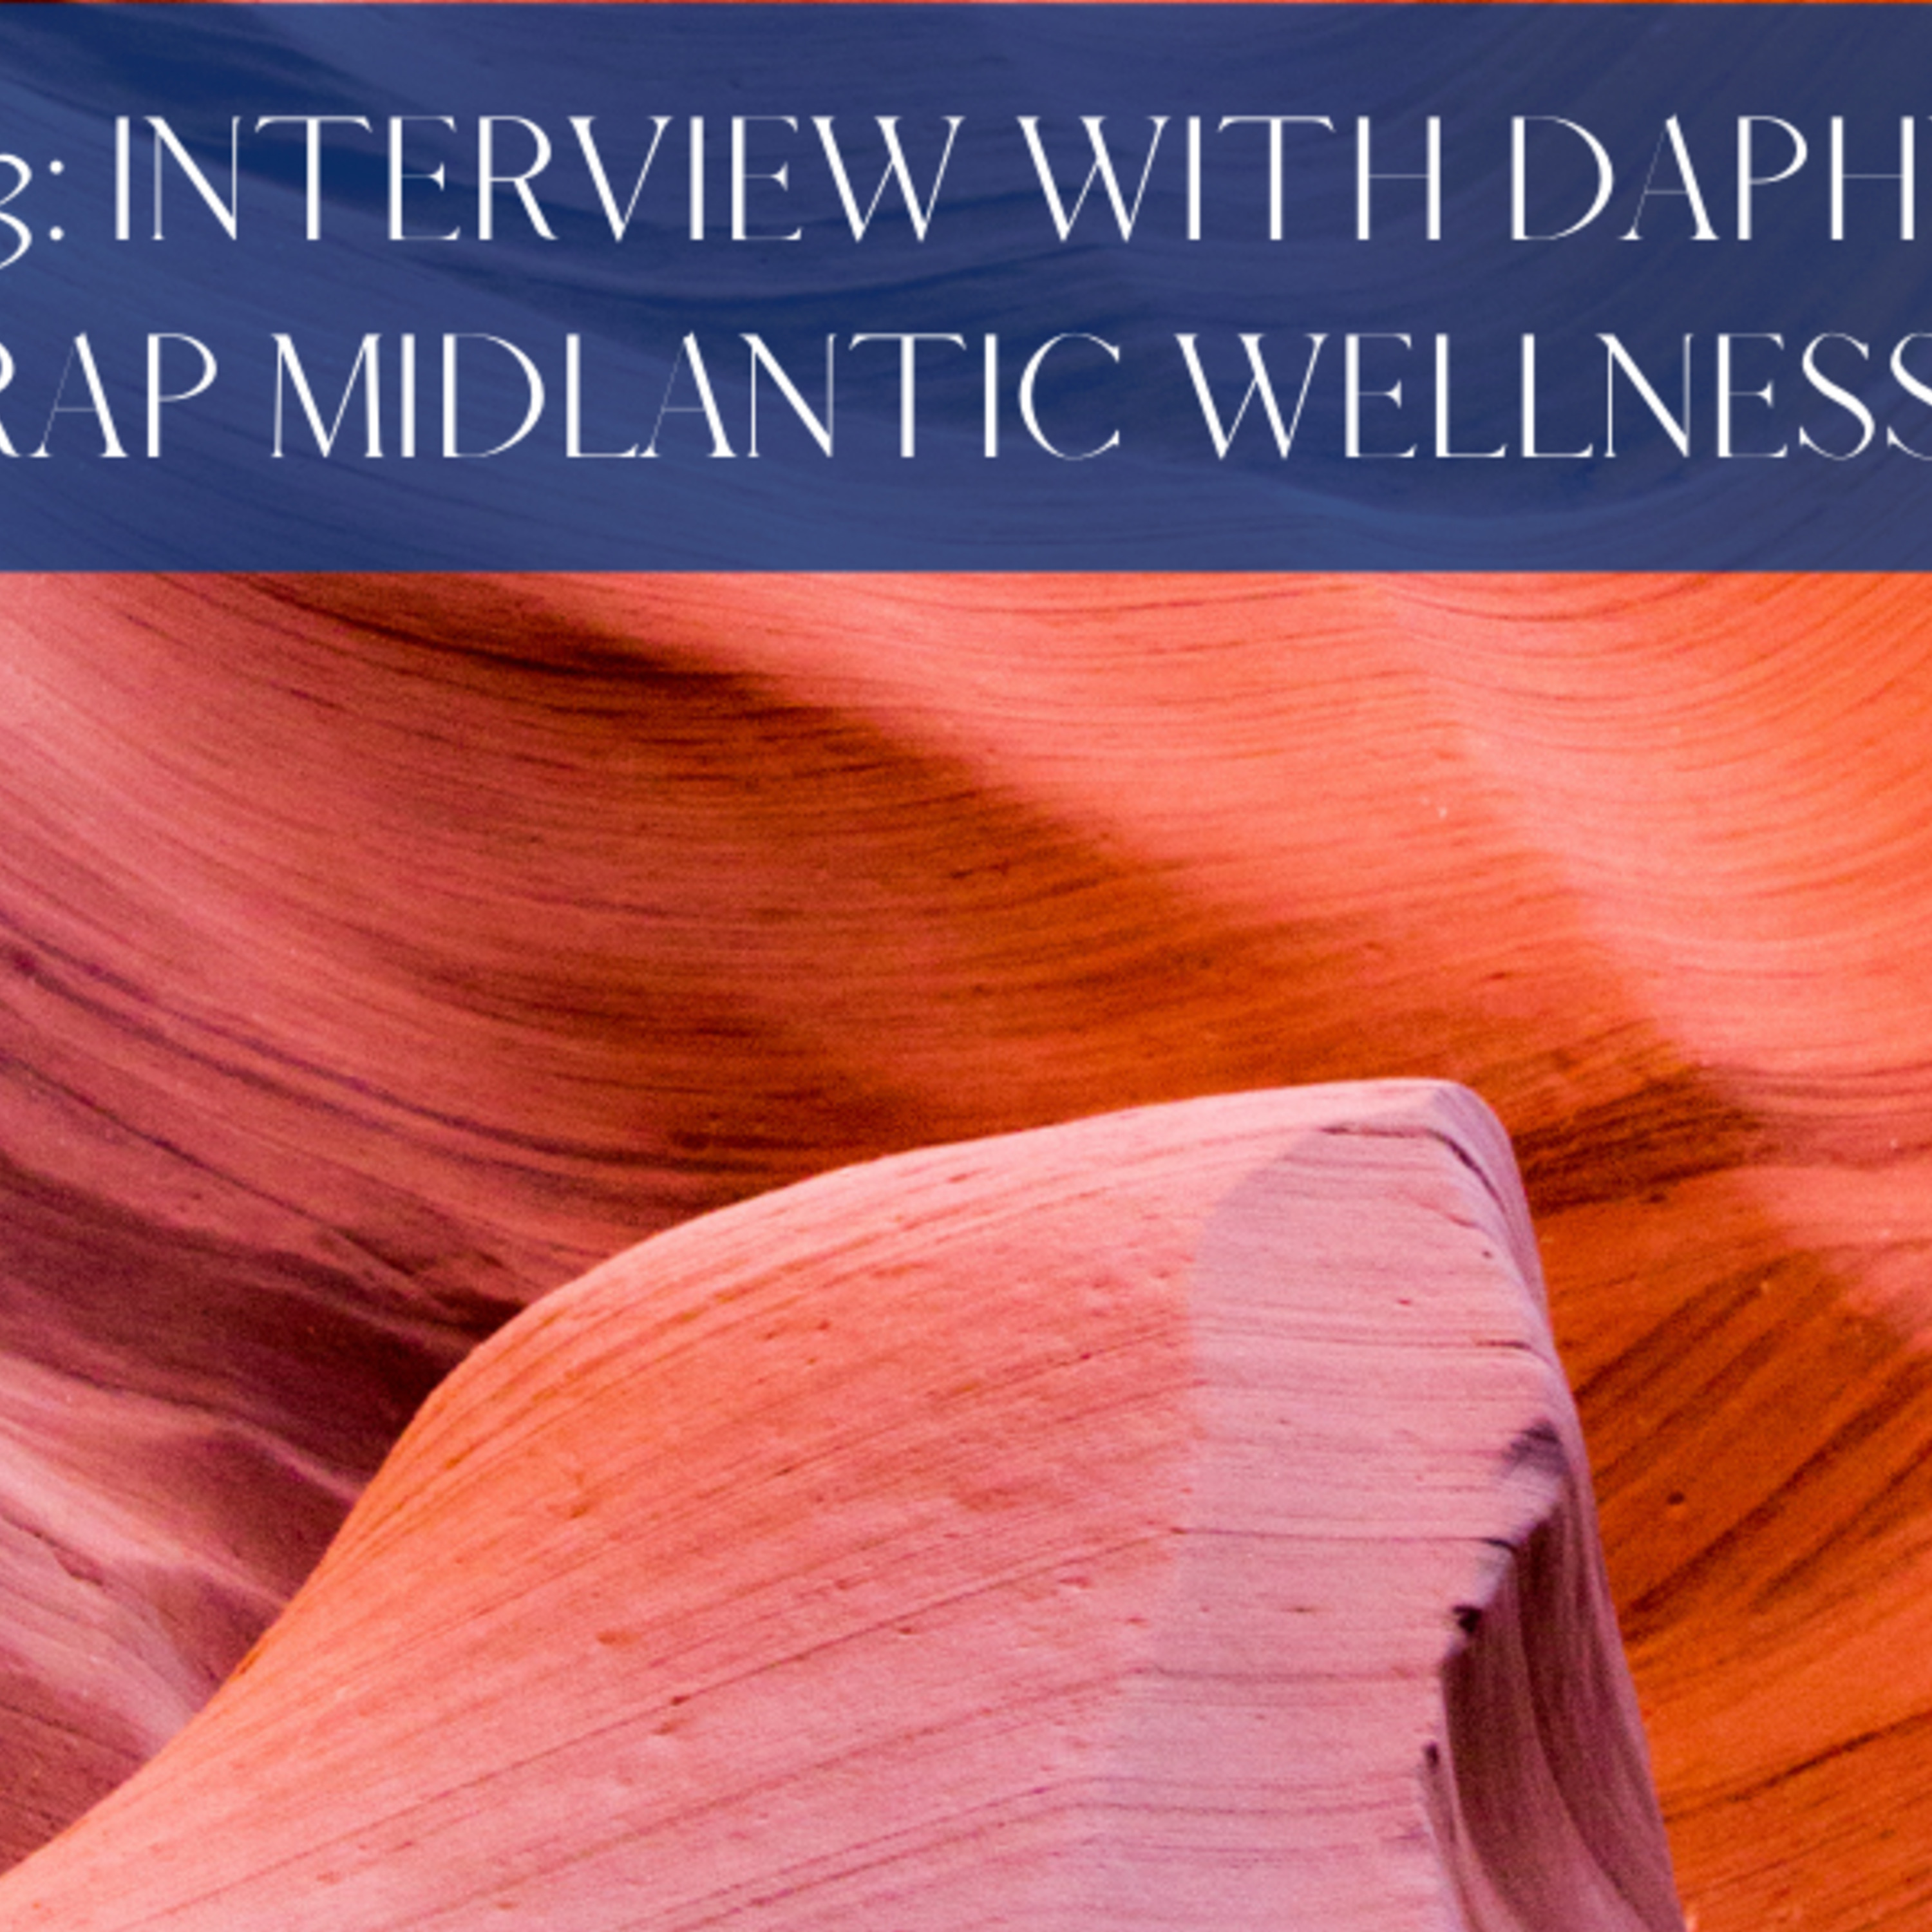 Episode 33: Interview with Daphne Wright-Gilstrap Midlantic Wellness Center